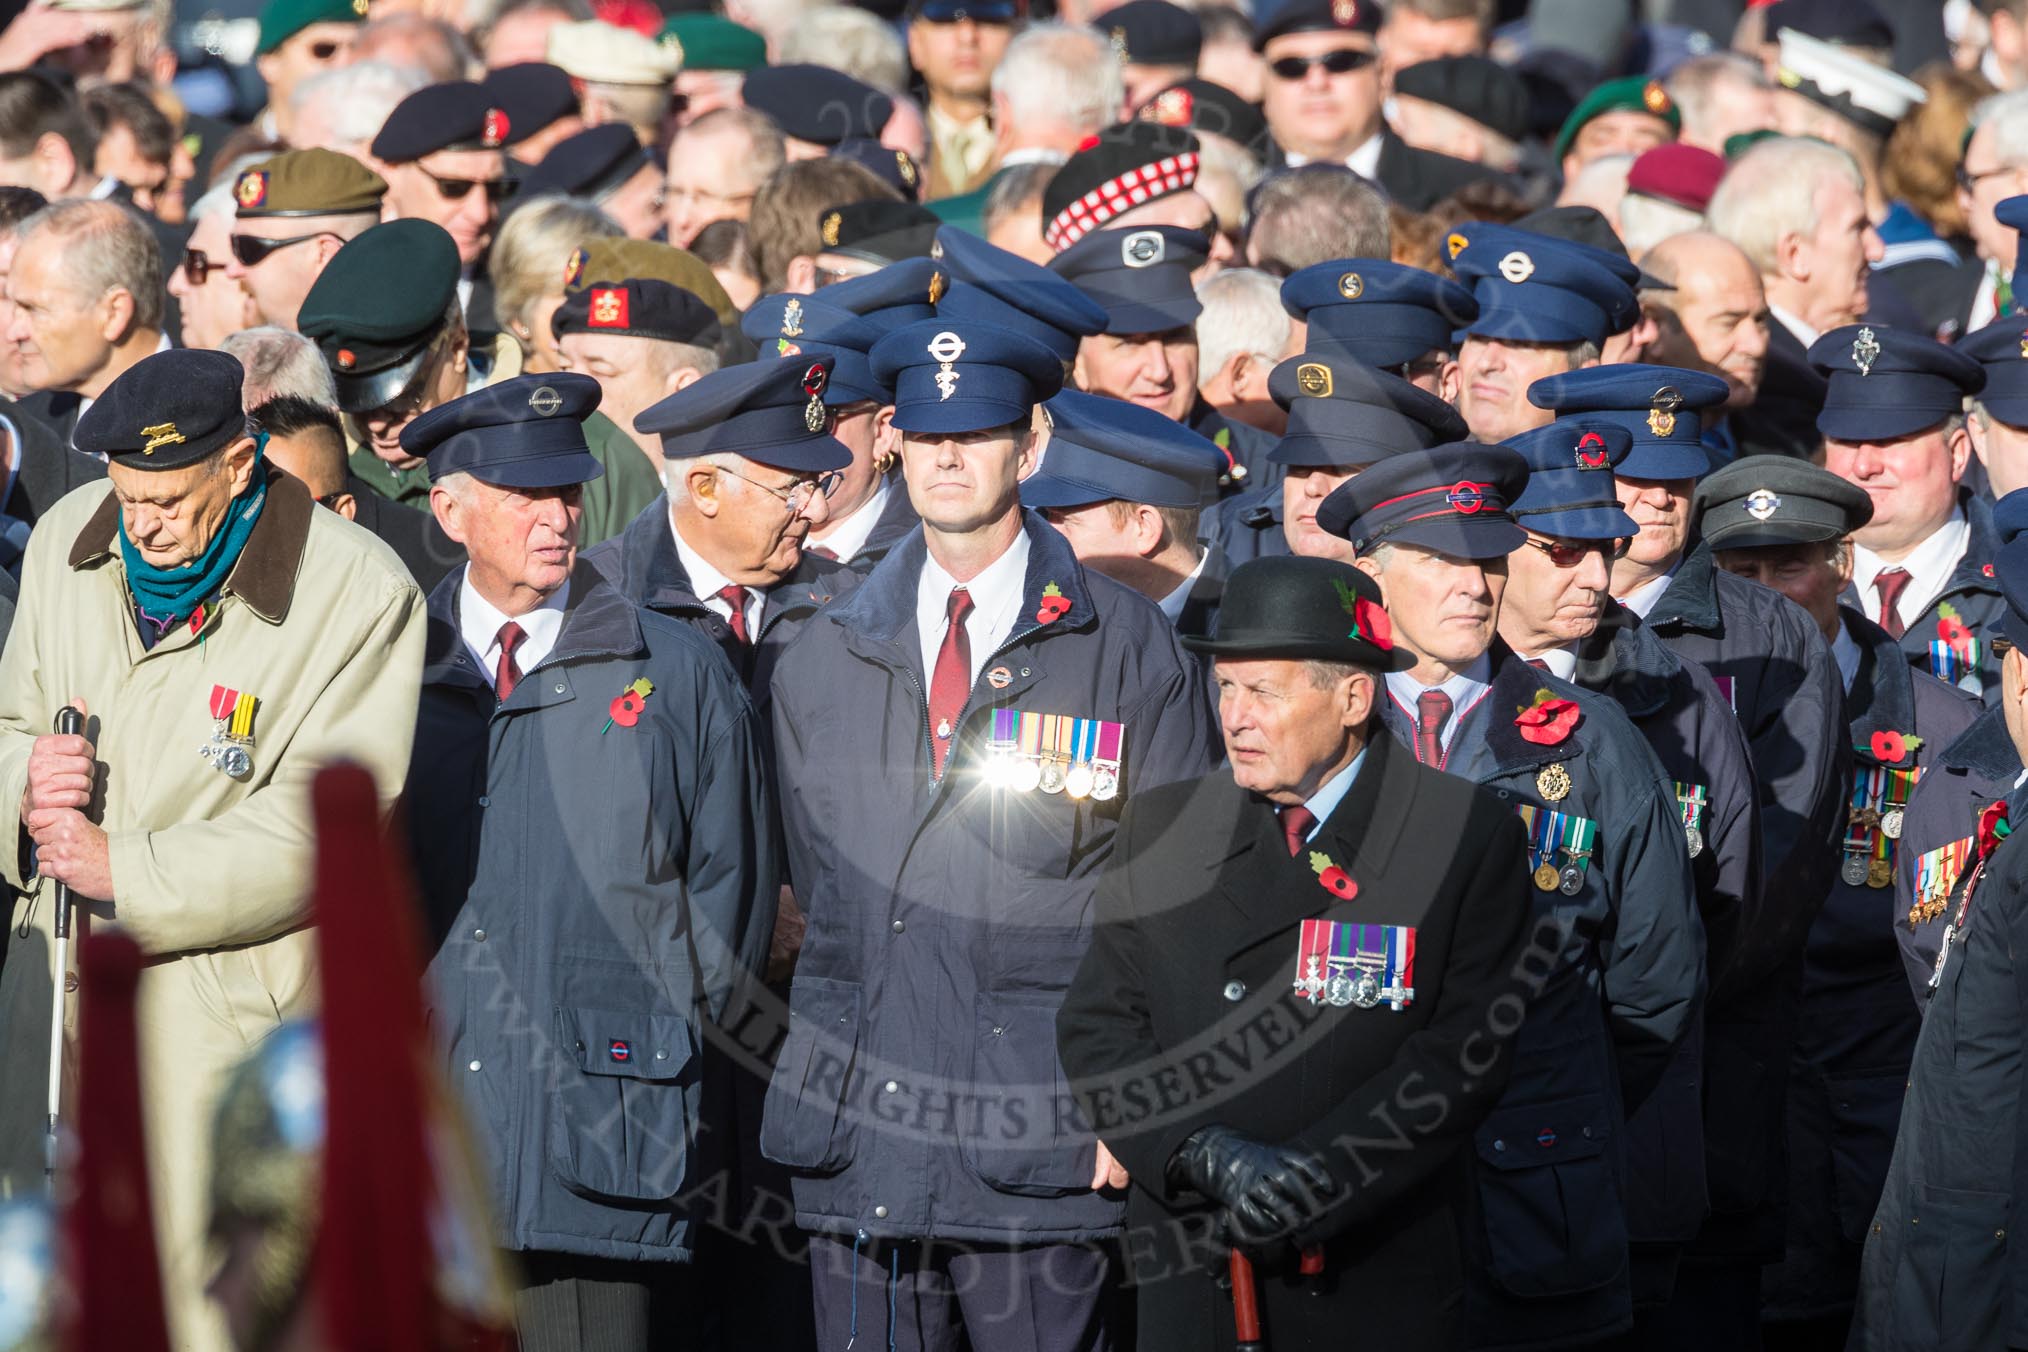 March Past, Remembrance Sunday at the Cenotaph 2016.
Cenotaph, Whitehall, London SW1,
London,
Greater London,
United Kingdom,
on 13 November 2016 at 12:35, image #354